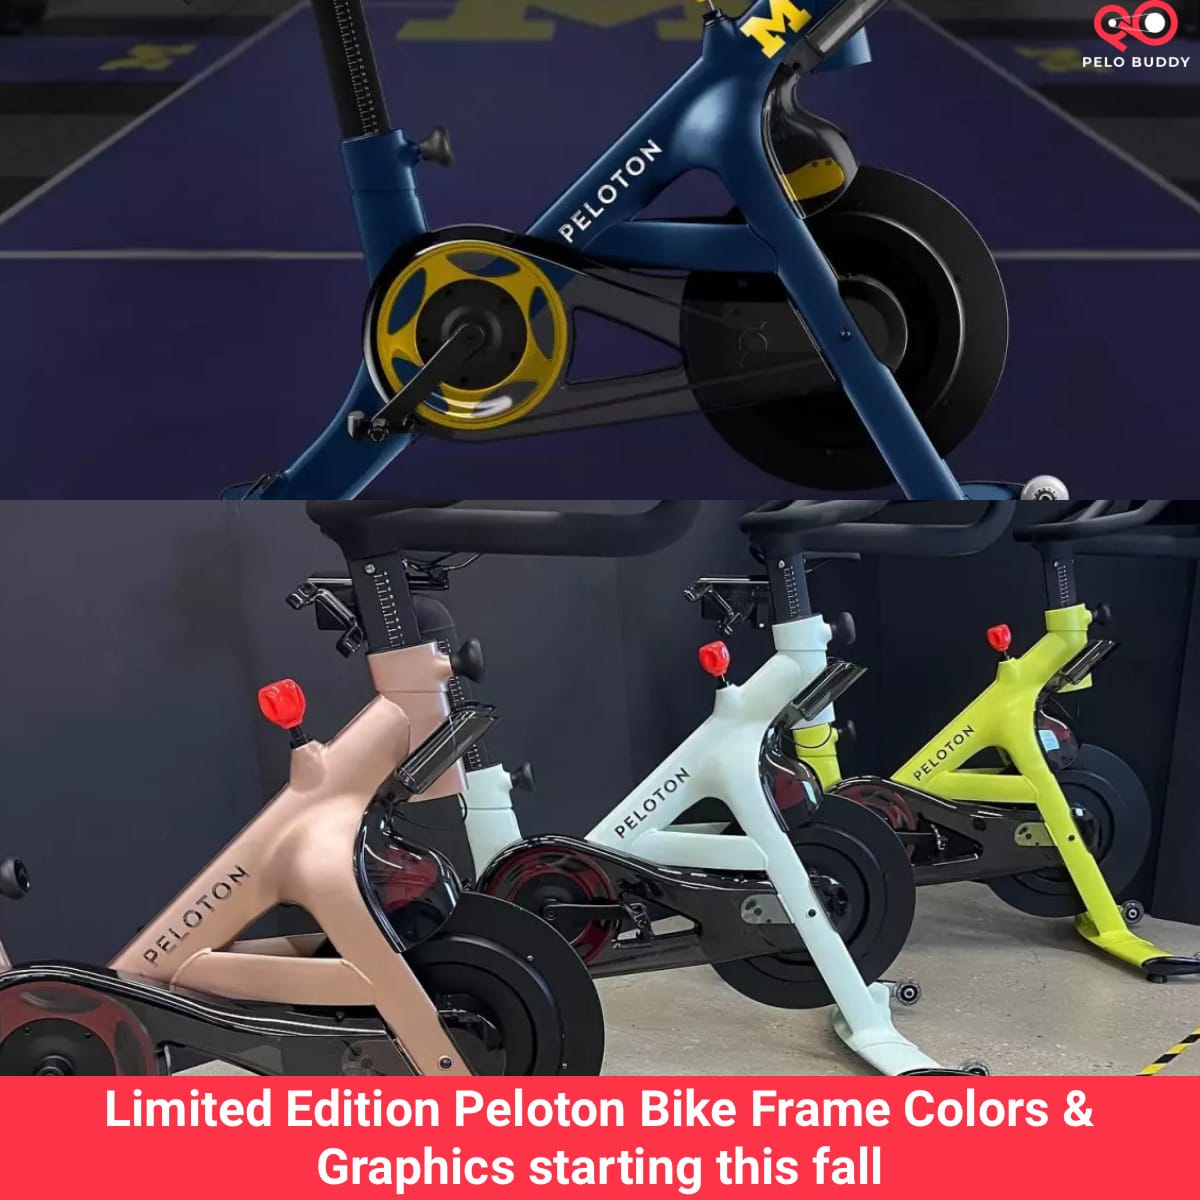 Limited Edition Peloton Bike Frame Colors & Graphics starting this fall -  Peloton Buddy